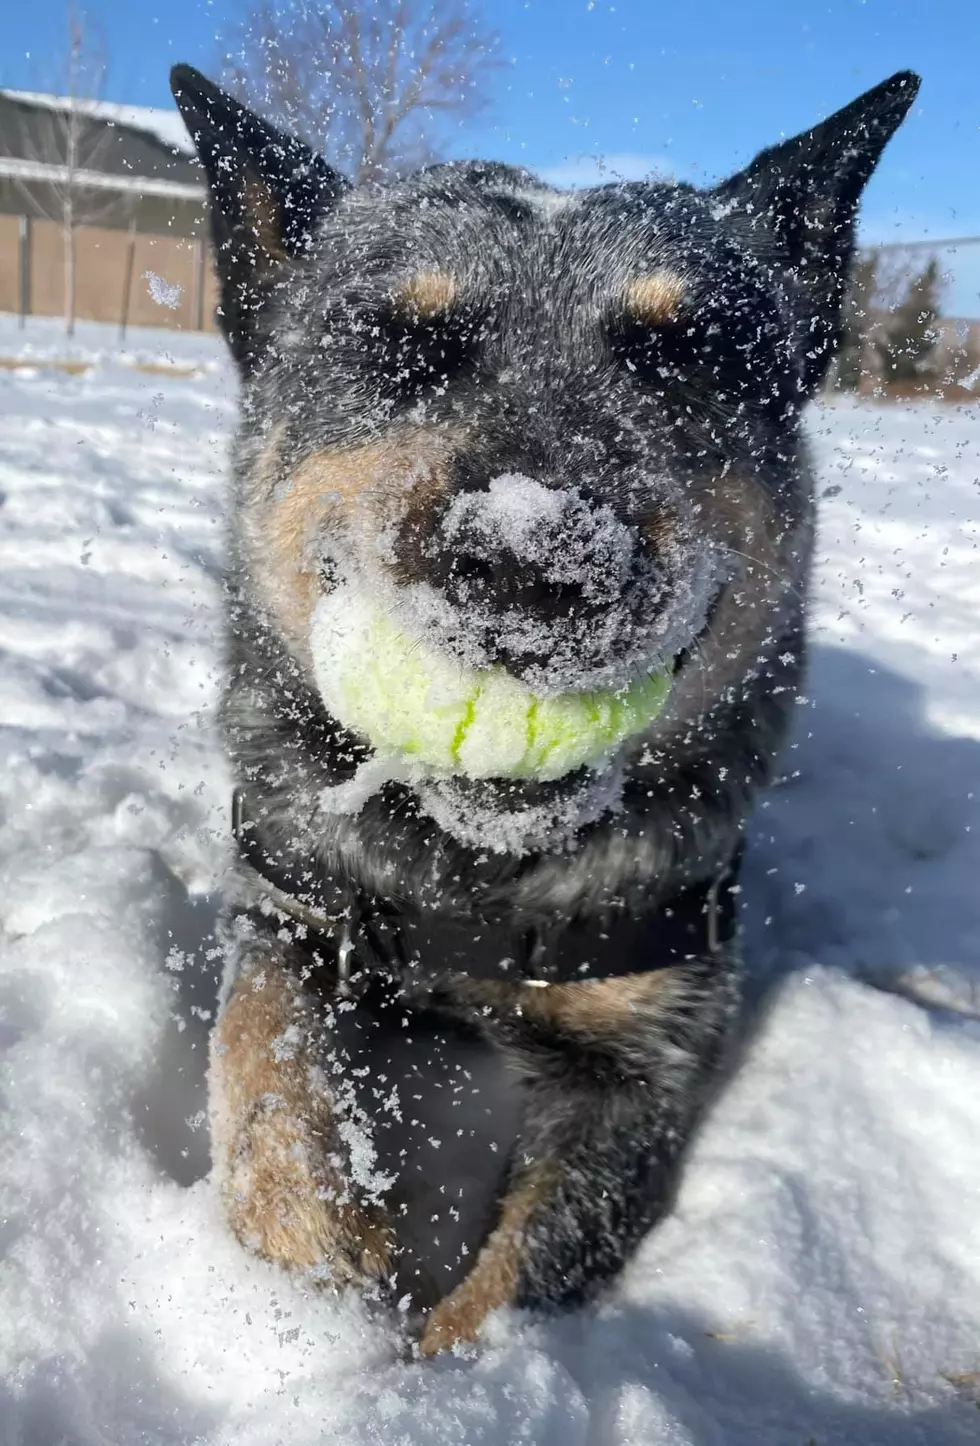 Just 10 WY Shelter Dogs Enjoying The Snow Day